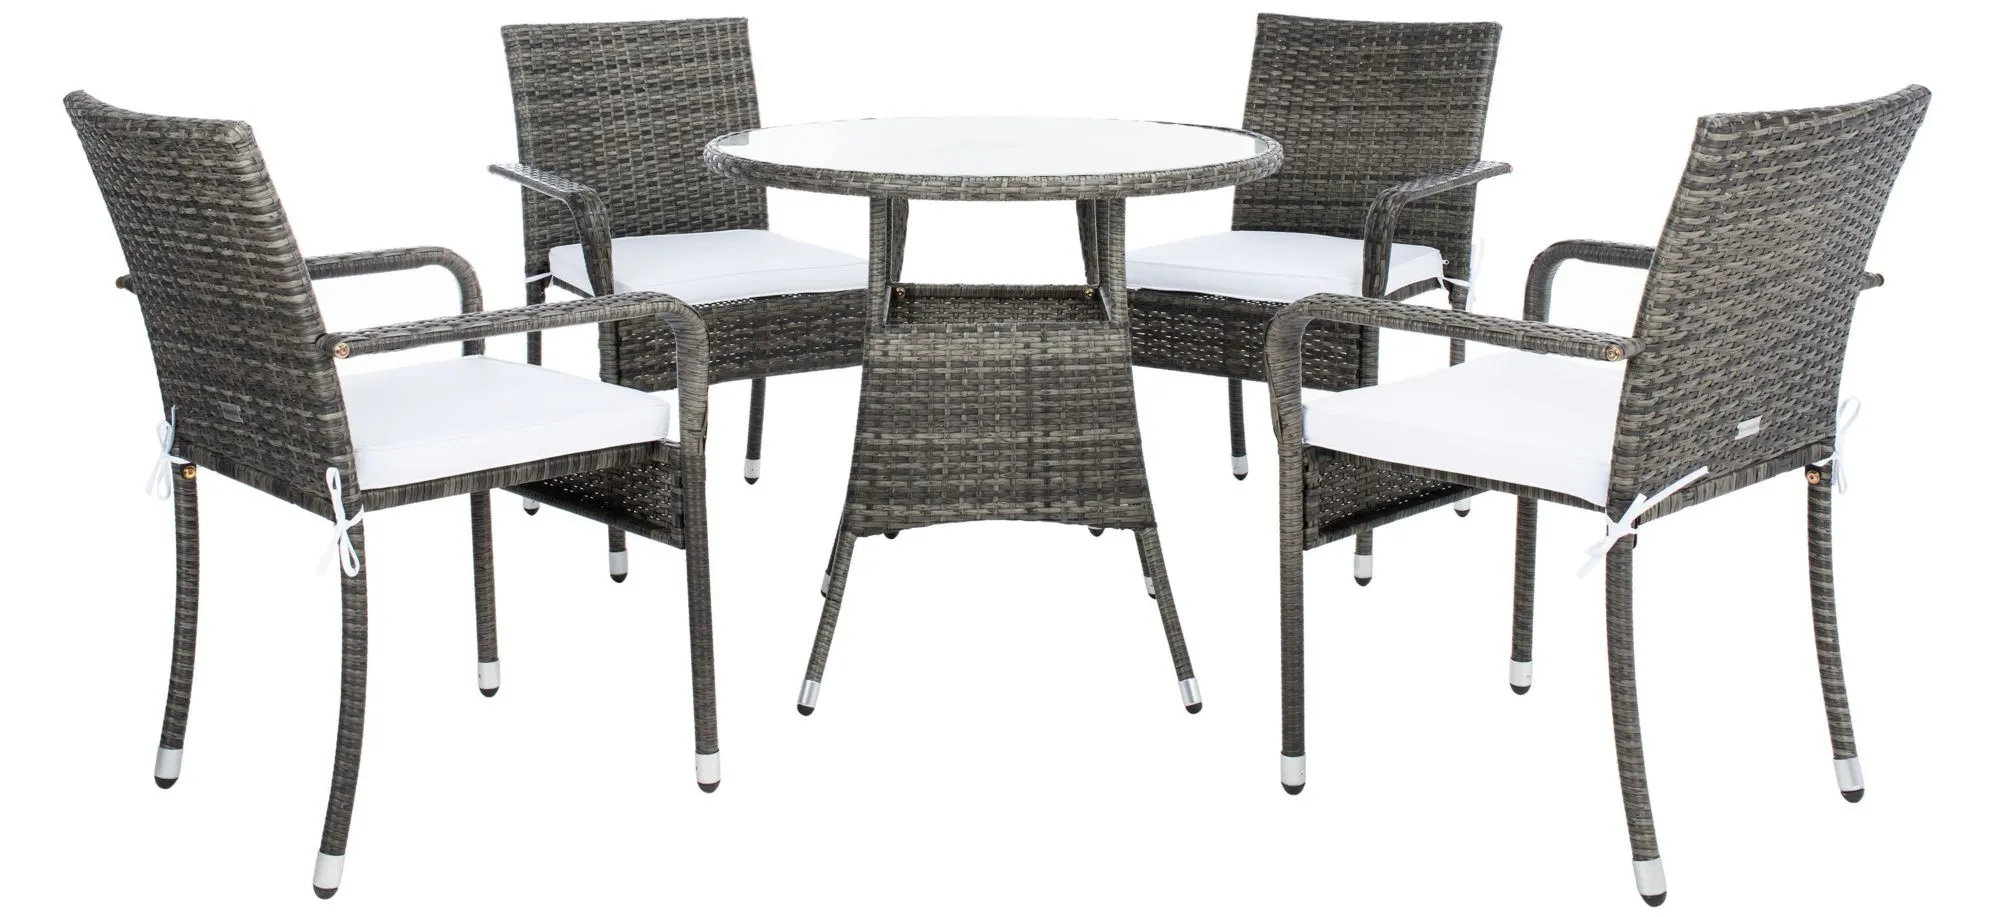 Orian 5-pc. Outdoor Dining Set in Gray by Safavieh